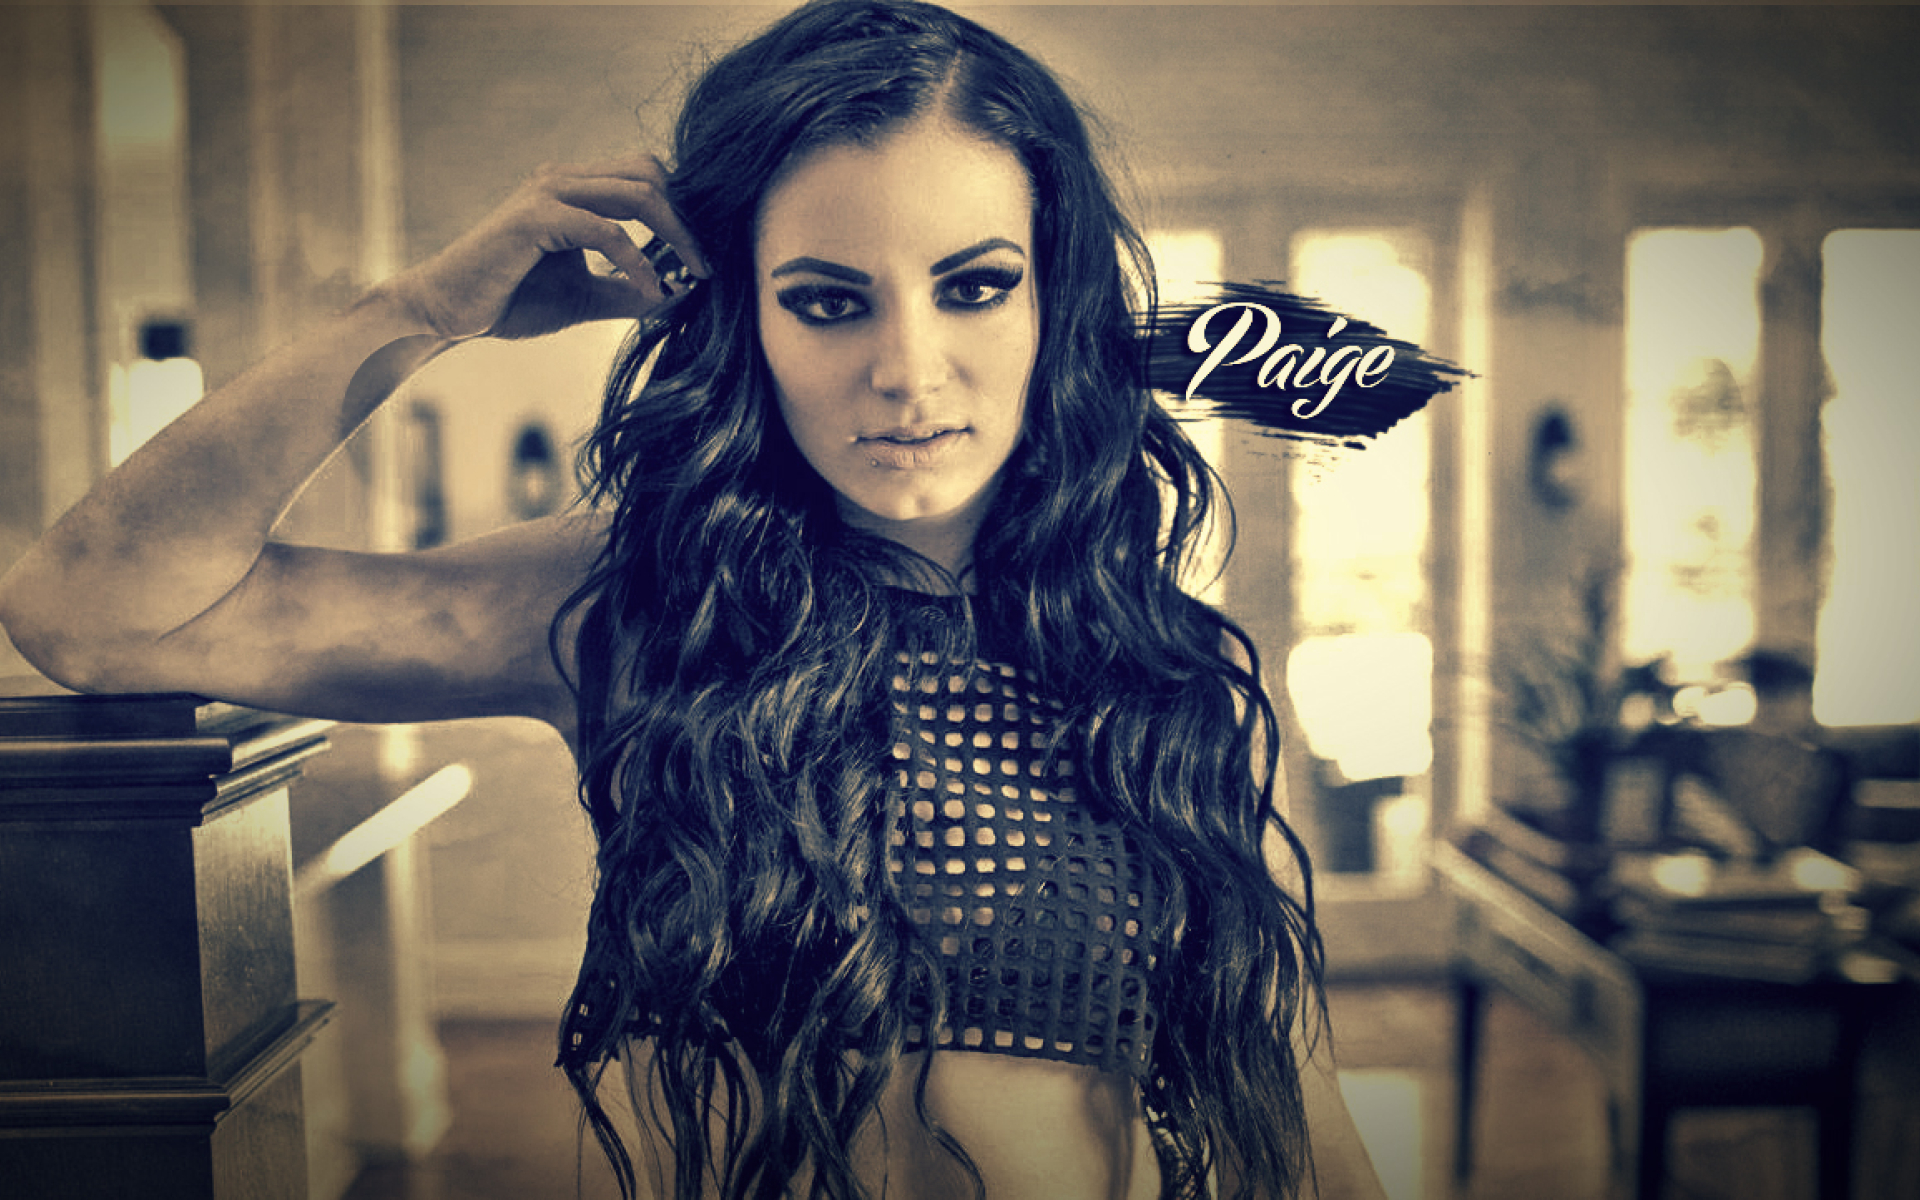 Hottest Woman 8/21/15 - PAIGE (WWE)! | King of The Flat Screen